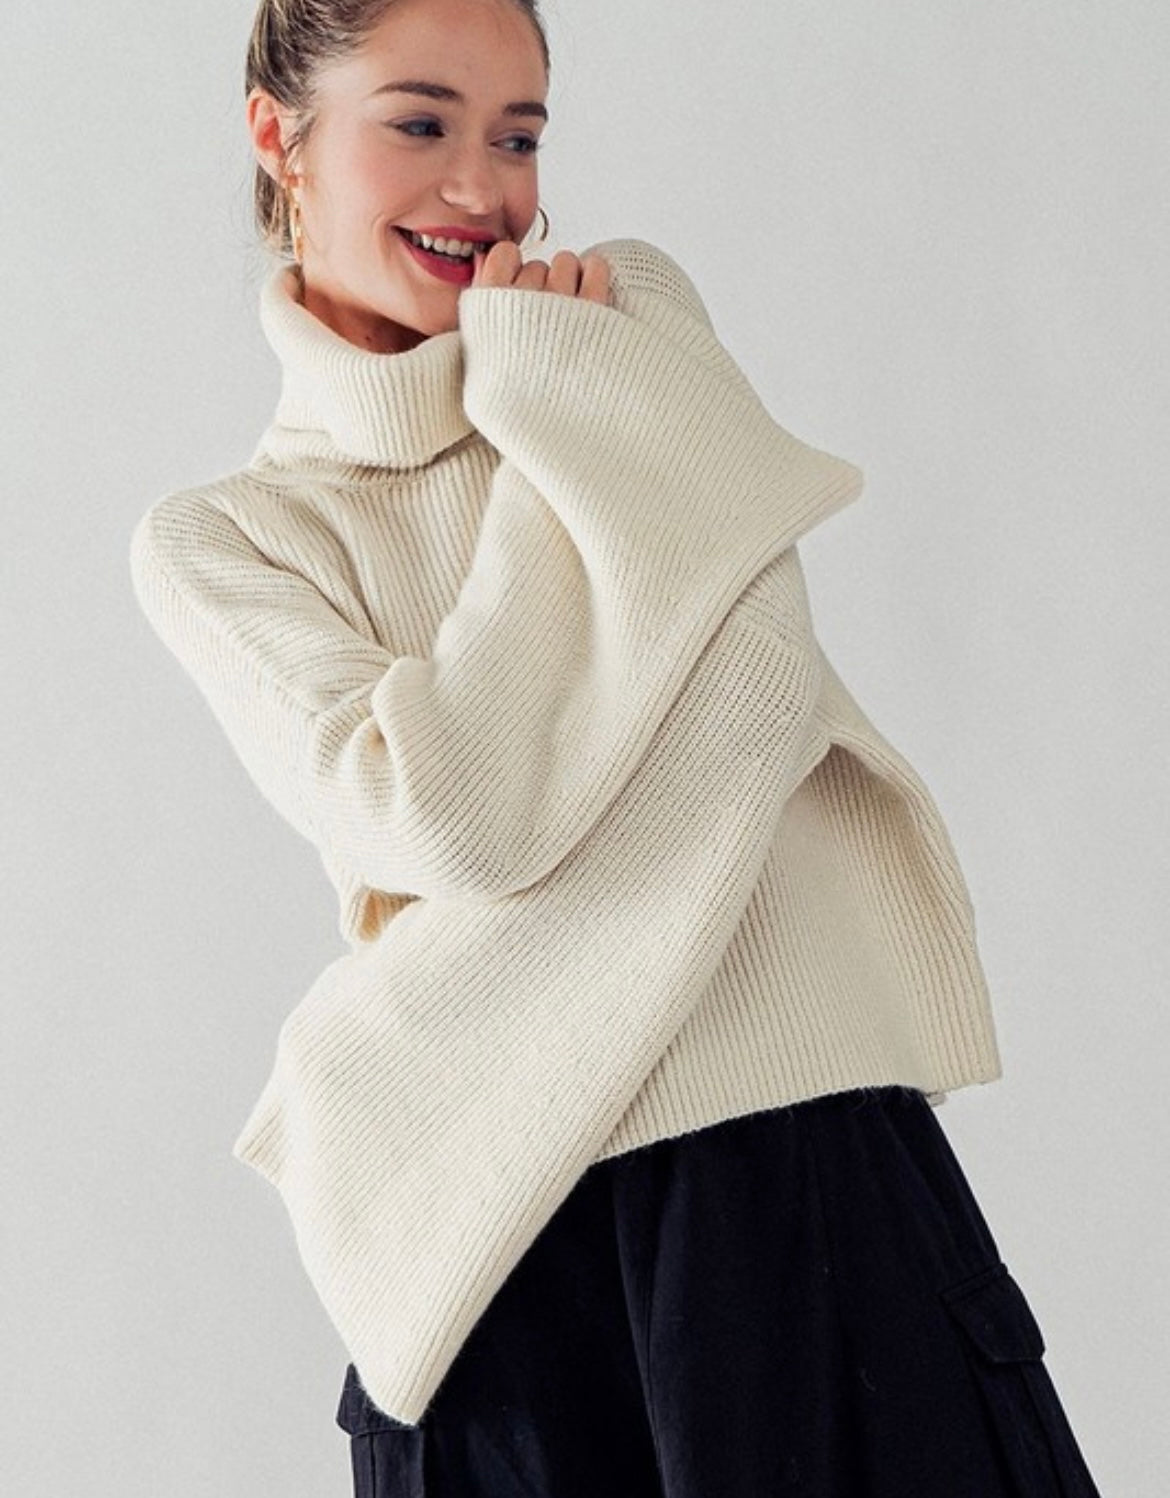 Bell Sleeved Knit Sweater